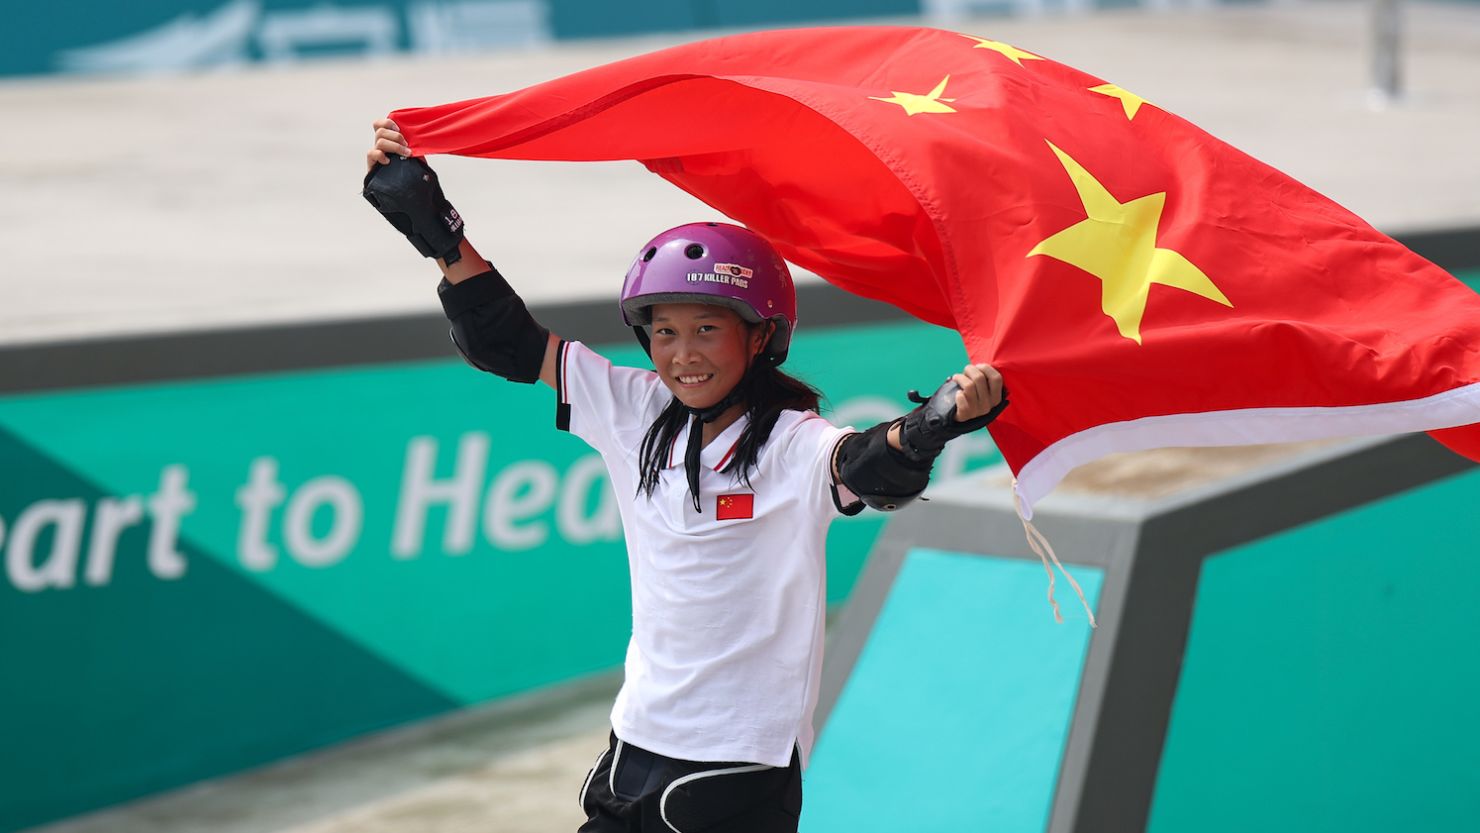 China's Cui Chenxi celebrates after winning the women's skateboarding street final on day four of the Asian Games in Hangzhou, China.